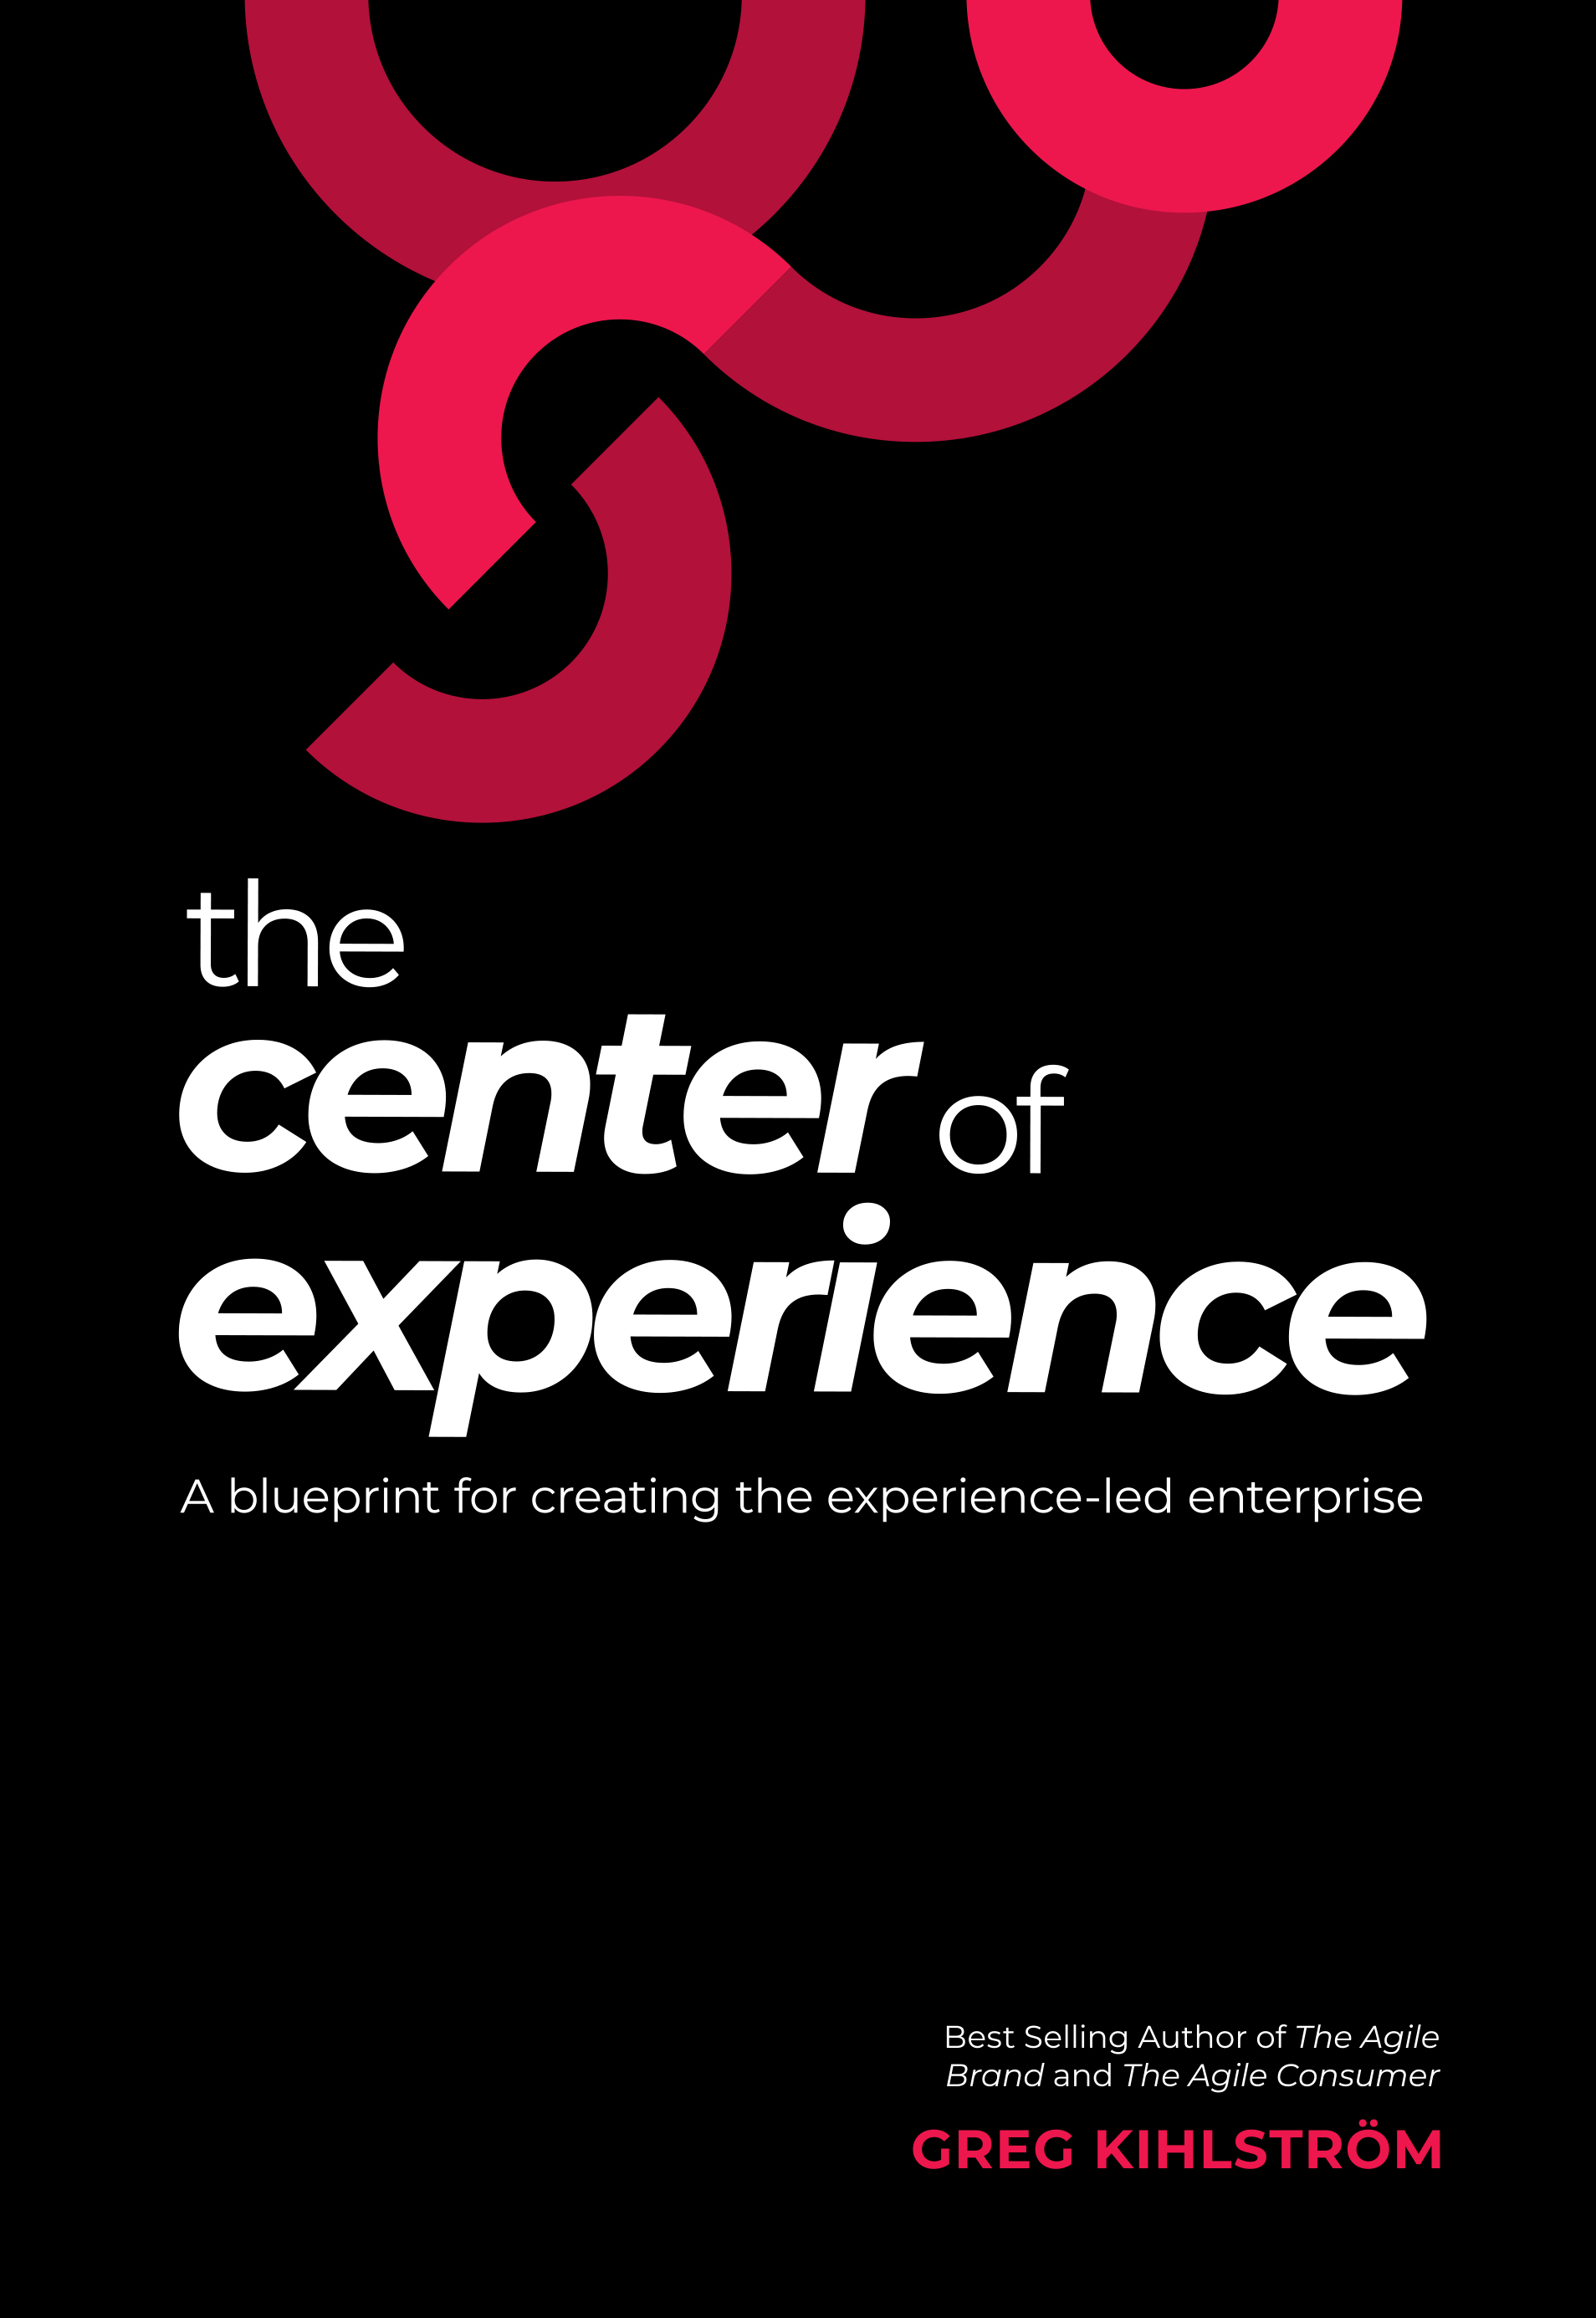 The Center of Experience by Greg Kihlstrom Book Cover